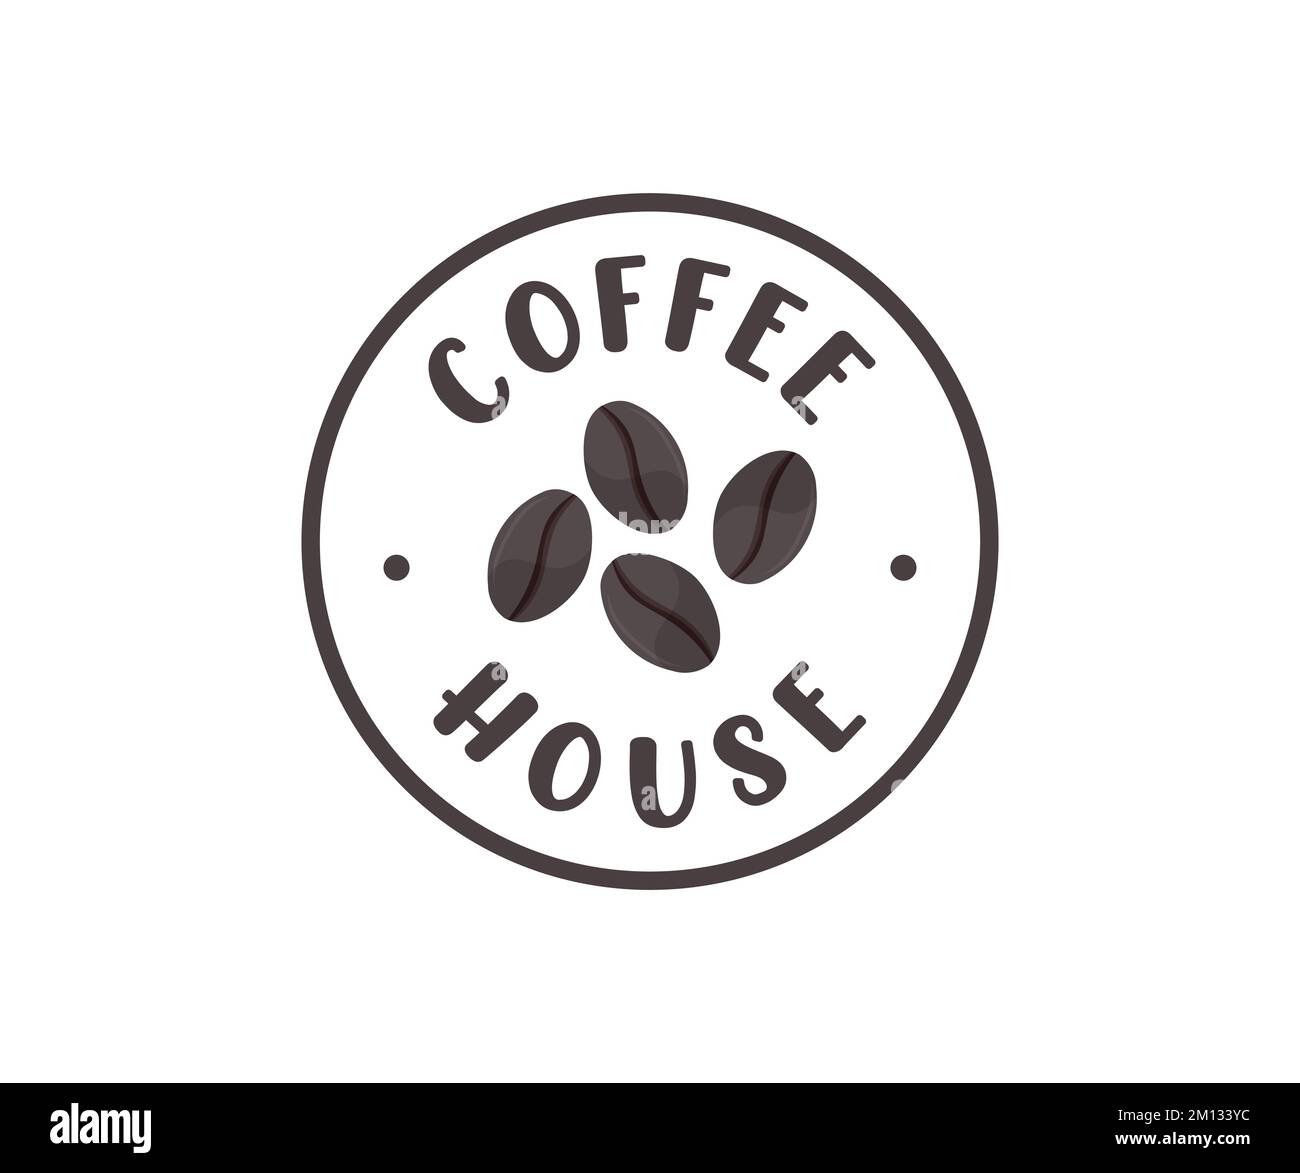 Coffee House, Coffe Shop, Cafe logo design. Coffee house label. Corporate identity logotype, company graphic design vector design and illustration. Stock Vector